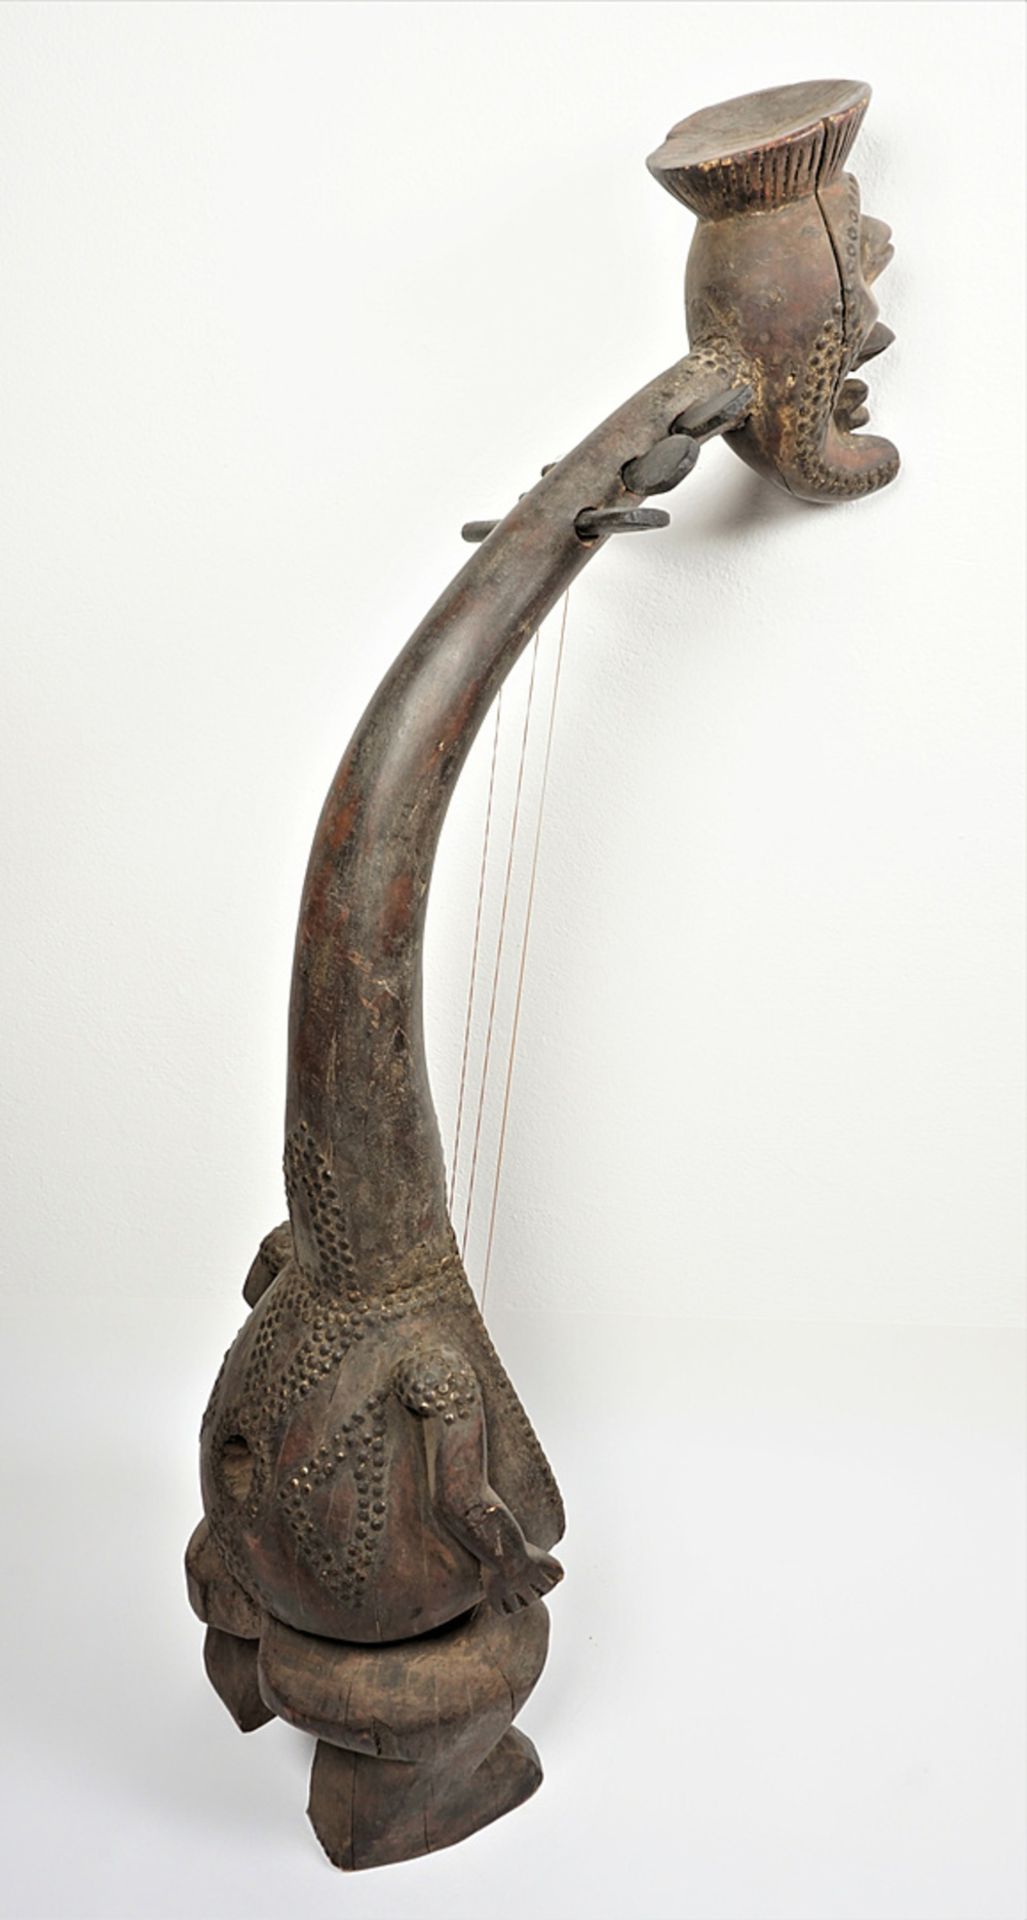 Figurative musical instrument similar to a kundi, DR Congo - Image 4 of 4